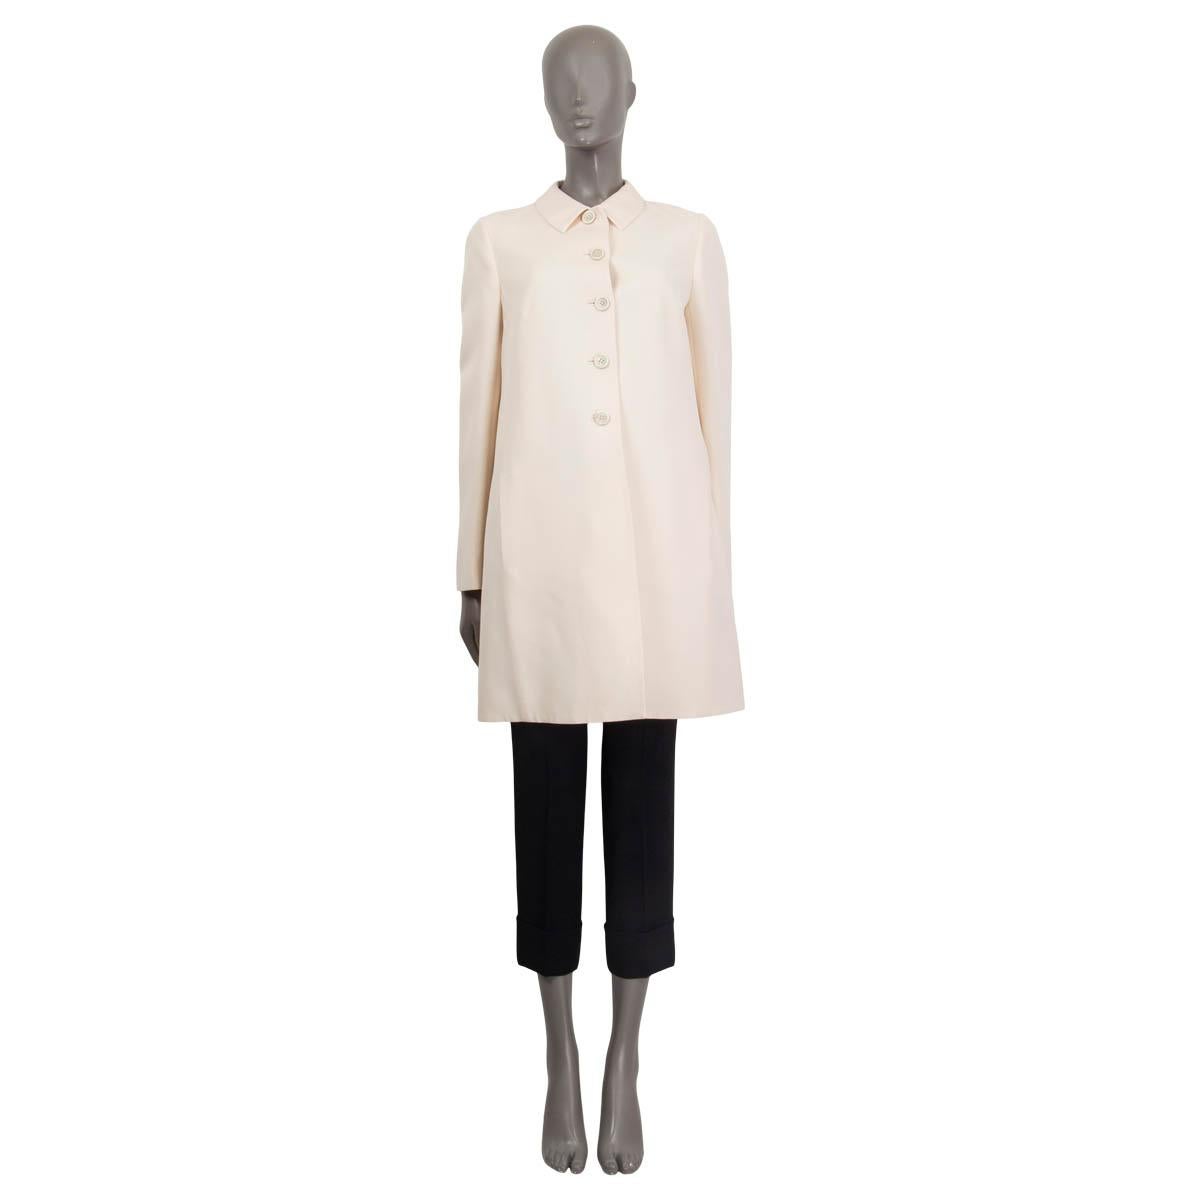 100% authentic Valentino a line coat in off-white wool (71%) and silk (29%). Features two slit pockets on the front and a black box pleat at the back. Opens with five buttons on the front. Lined in off-white polyester (42%), cotton (36%) and silk